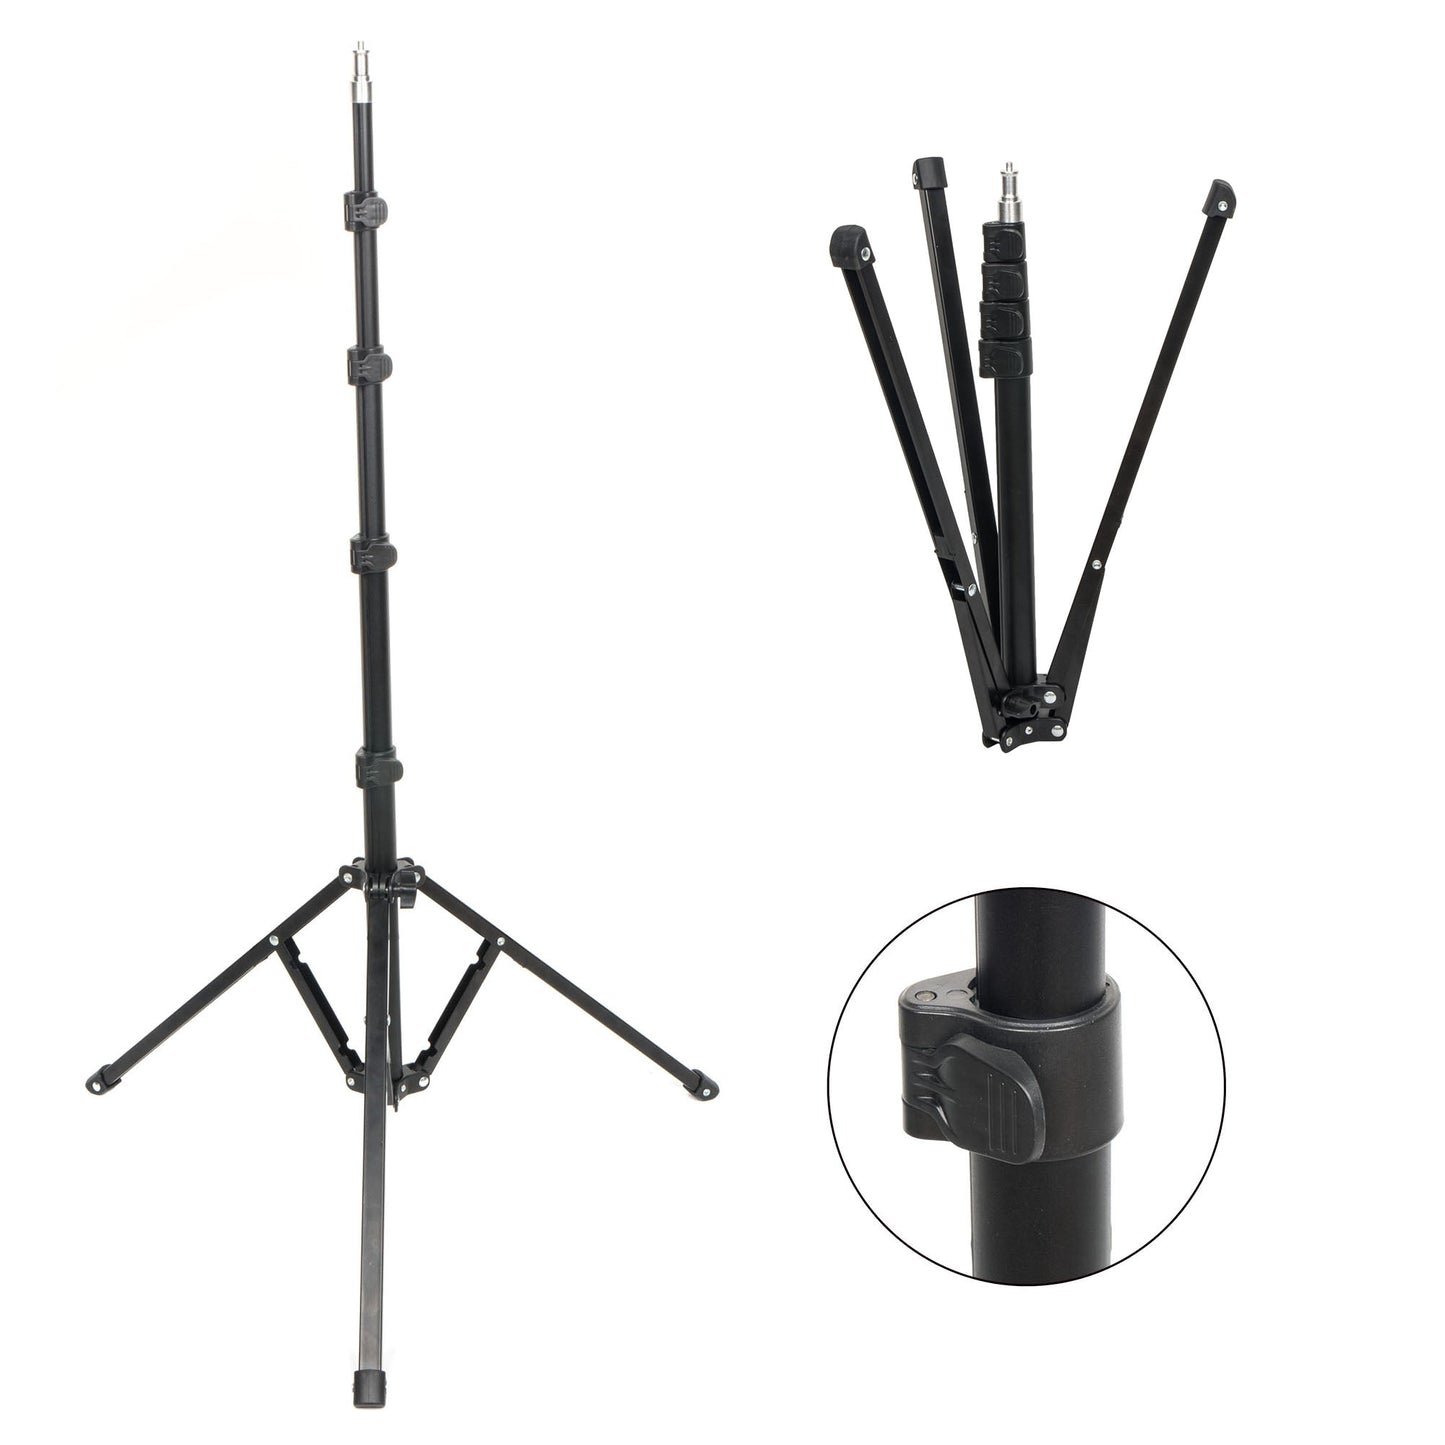 CAME-TV 1X Quick Set Up Compact and Portable Reverse Folding Light Stand for Traveling - CAME-TV